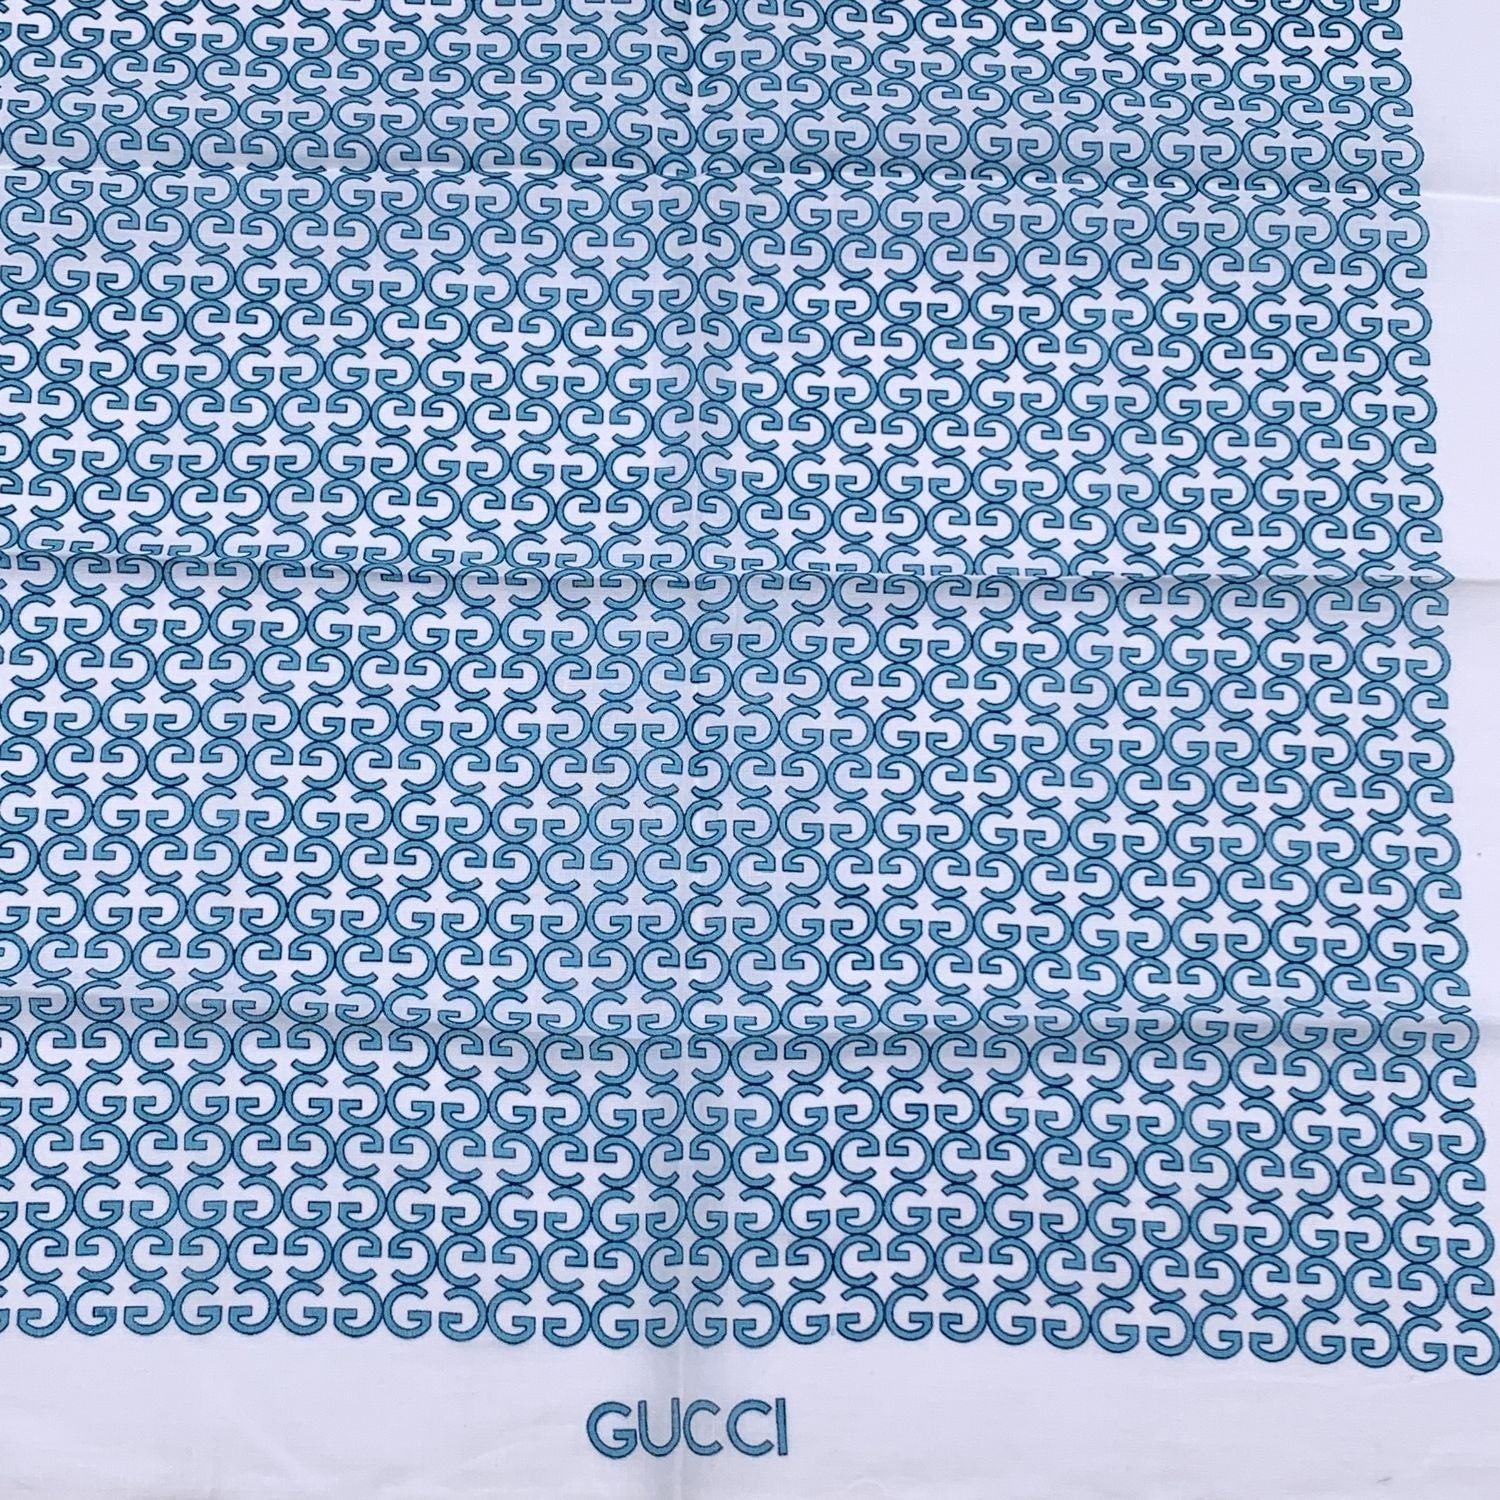 Vintage neck scarf by GUCCI. 100% Cotton. Blue GG logo pattern with white borders. 'Gucci' signature printed on the lower center border. Approx. Measurements: 17 x 17 inches - 43.2 x 43.2 cm. Gucci composition tag is still attached Details MATERIAL: